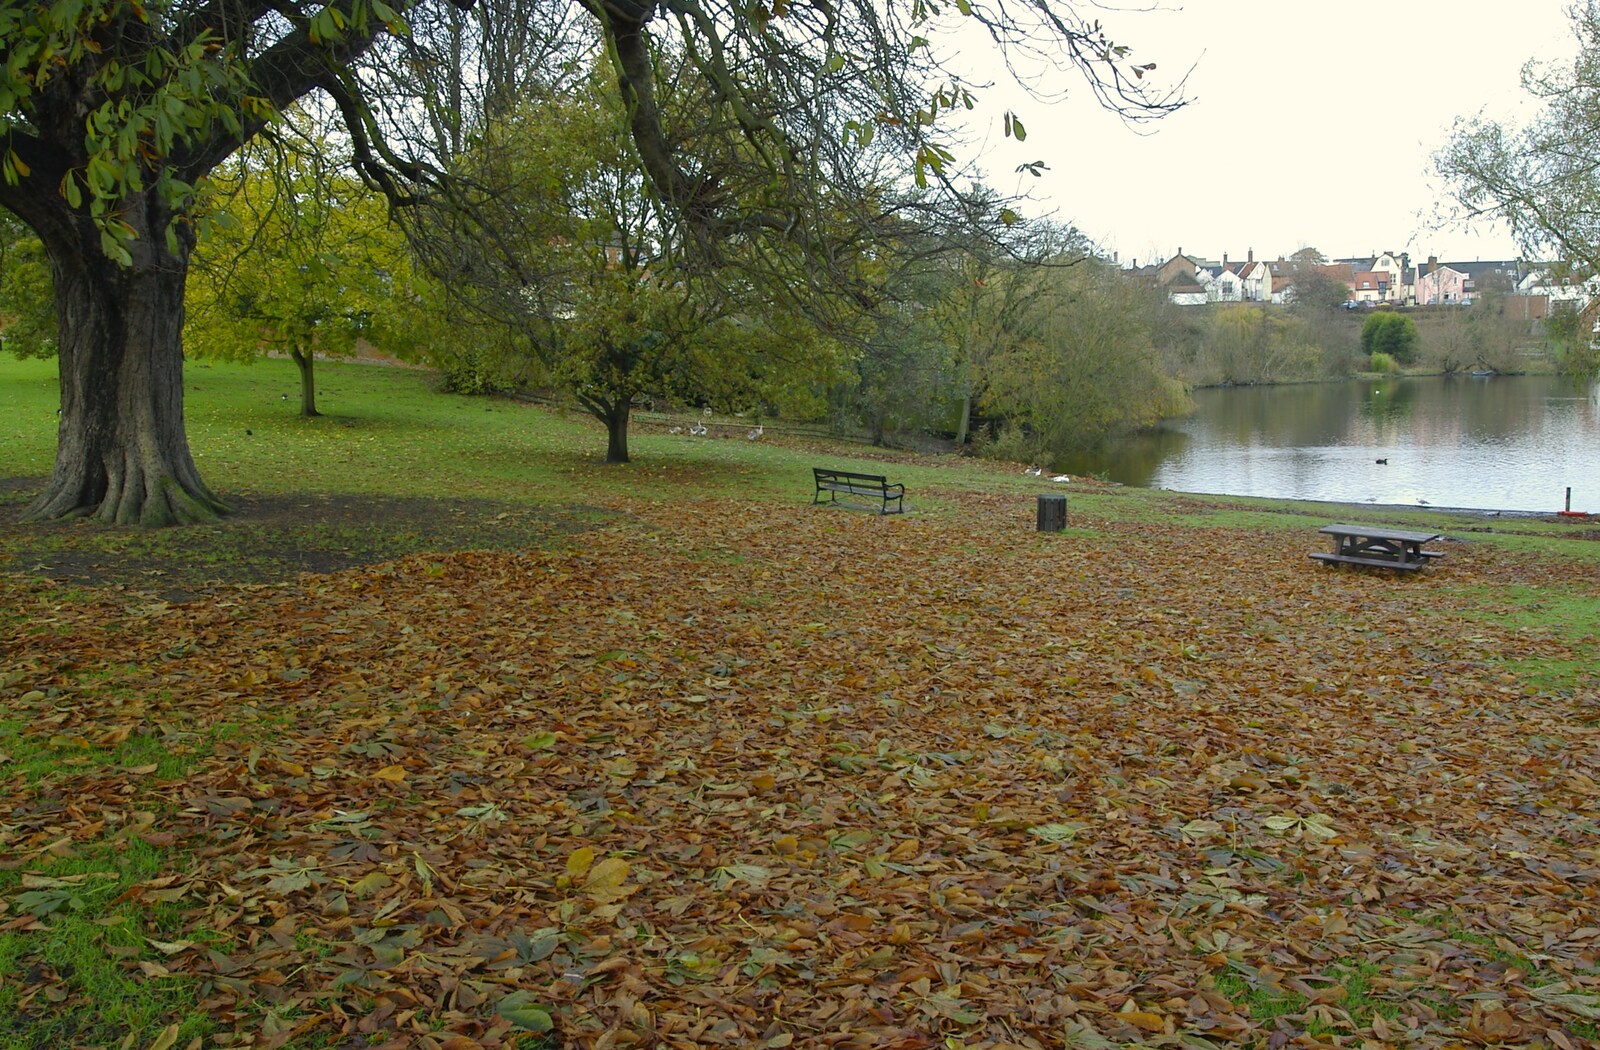 Autumn leaves on the ground in the park from Post-modern Alienation: Bleak House, a Diss Miscellany, Norfolk - 3rd December 2005